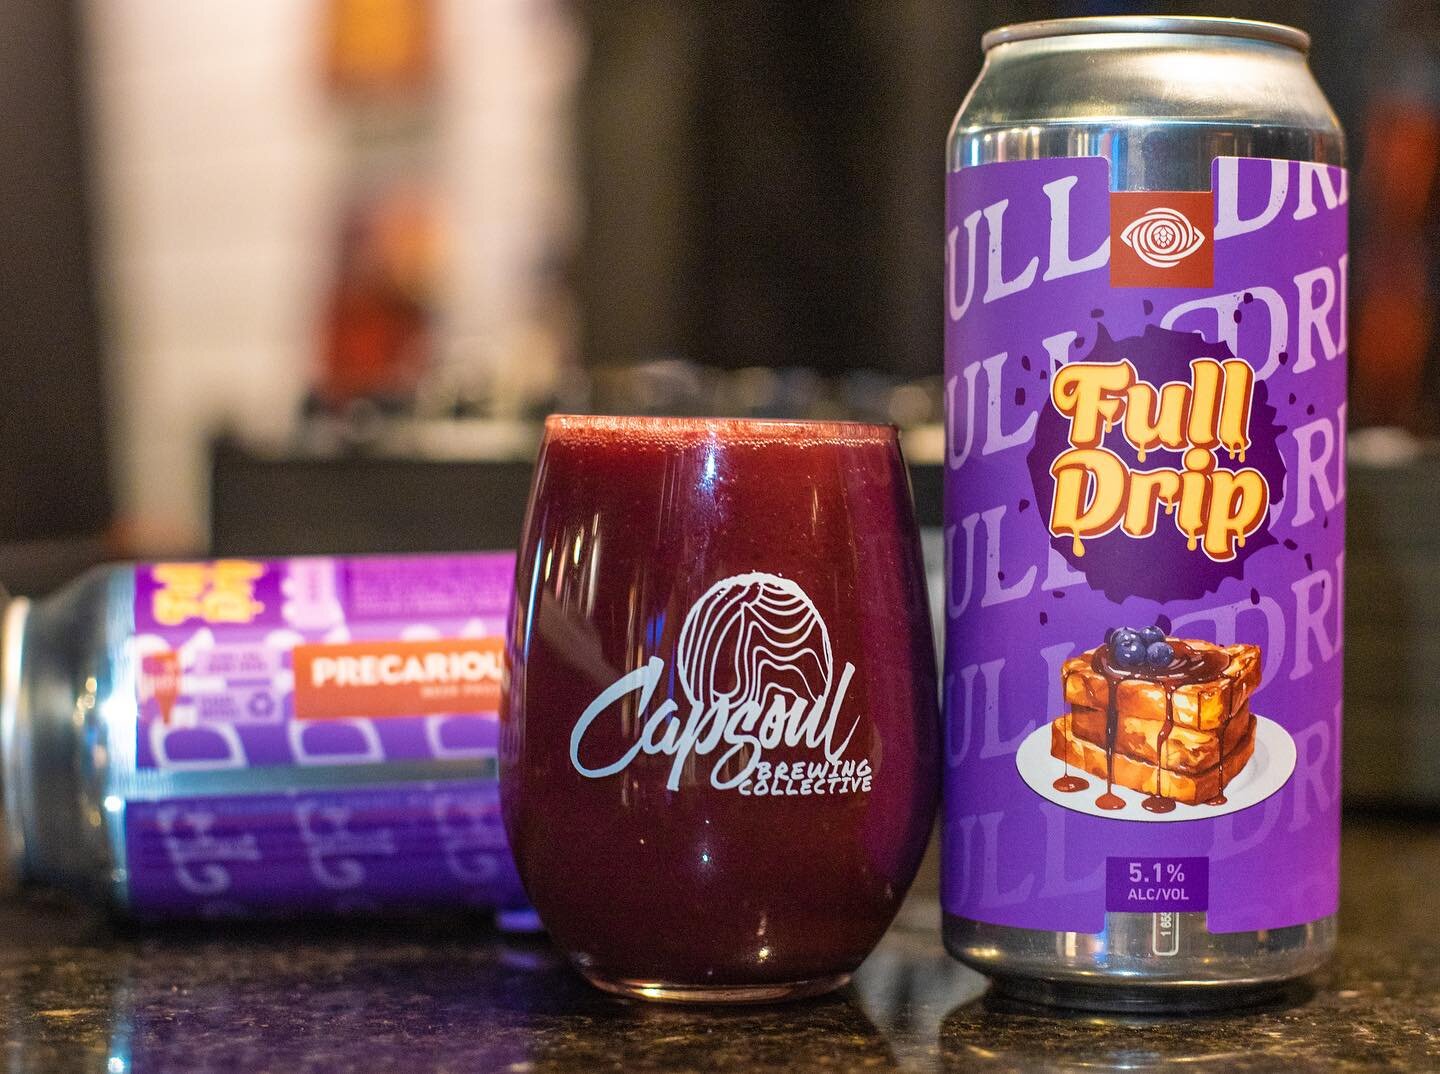 Never watered down, always the #FullDrip 

🫐🍁🍨☔️☔️☔️☔️🍨🍁🫐

@precariousbeerproject x @capsoulbrewing 

Drops tomorrow at noon at the Triangle Block Market at @precariousbeerproject w/ @dj_brannu spinning on the 1s and 2s. If you remember Big Sta